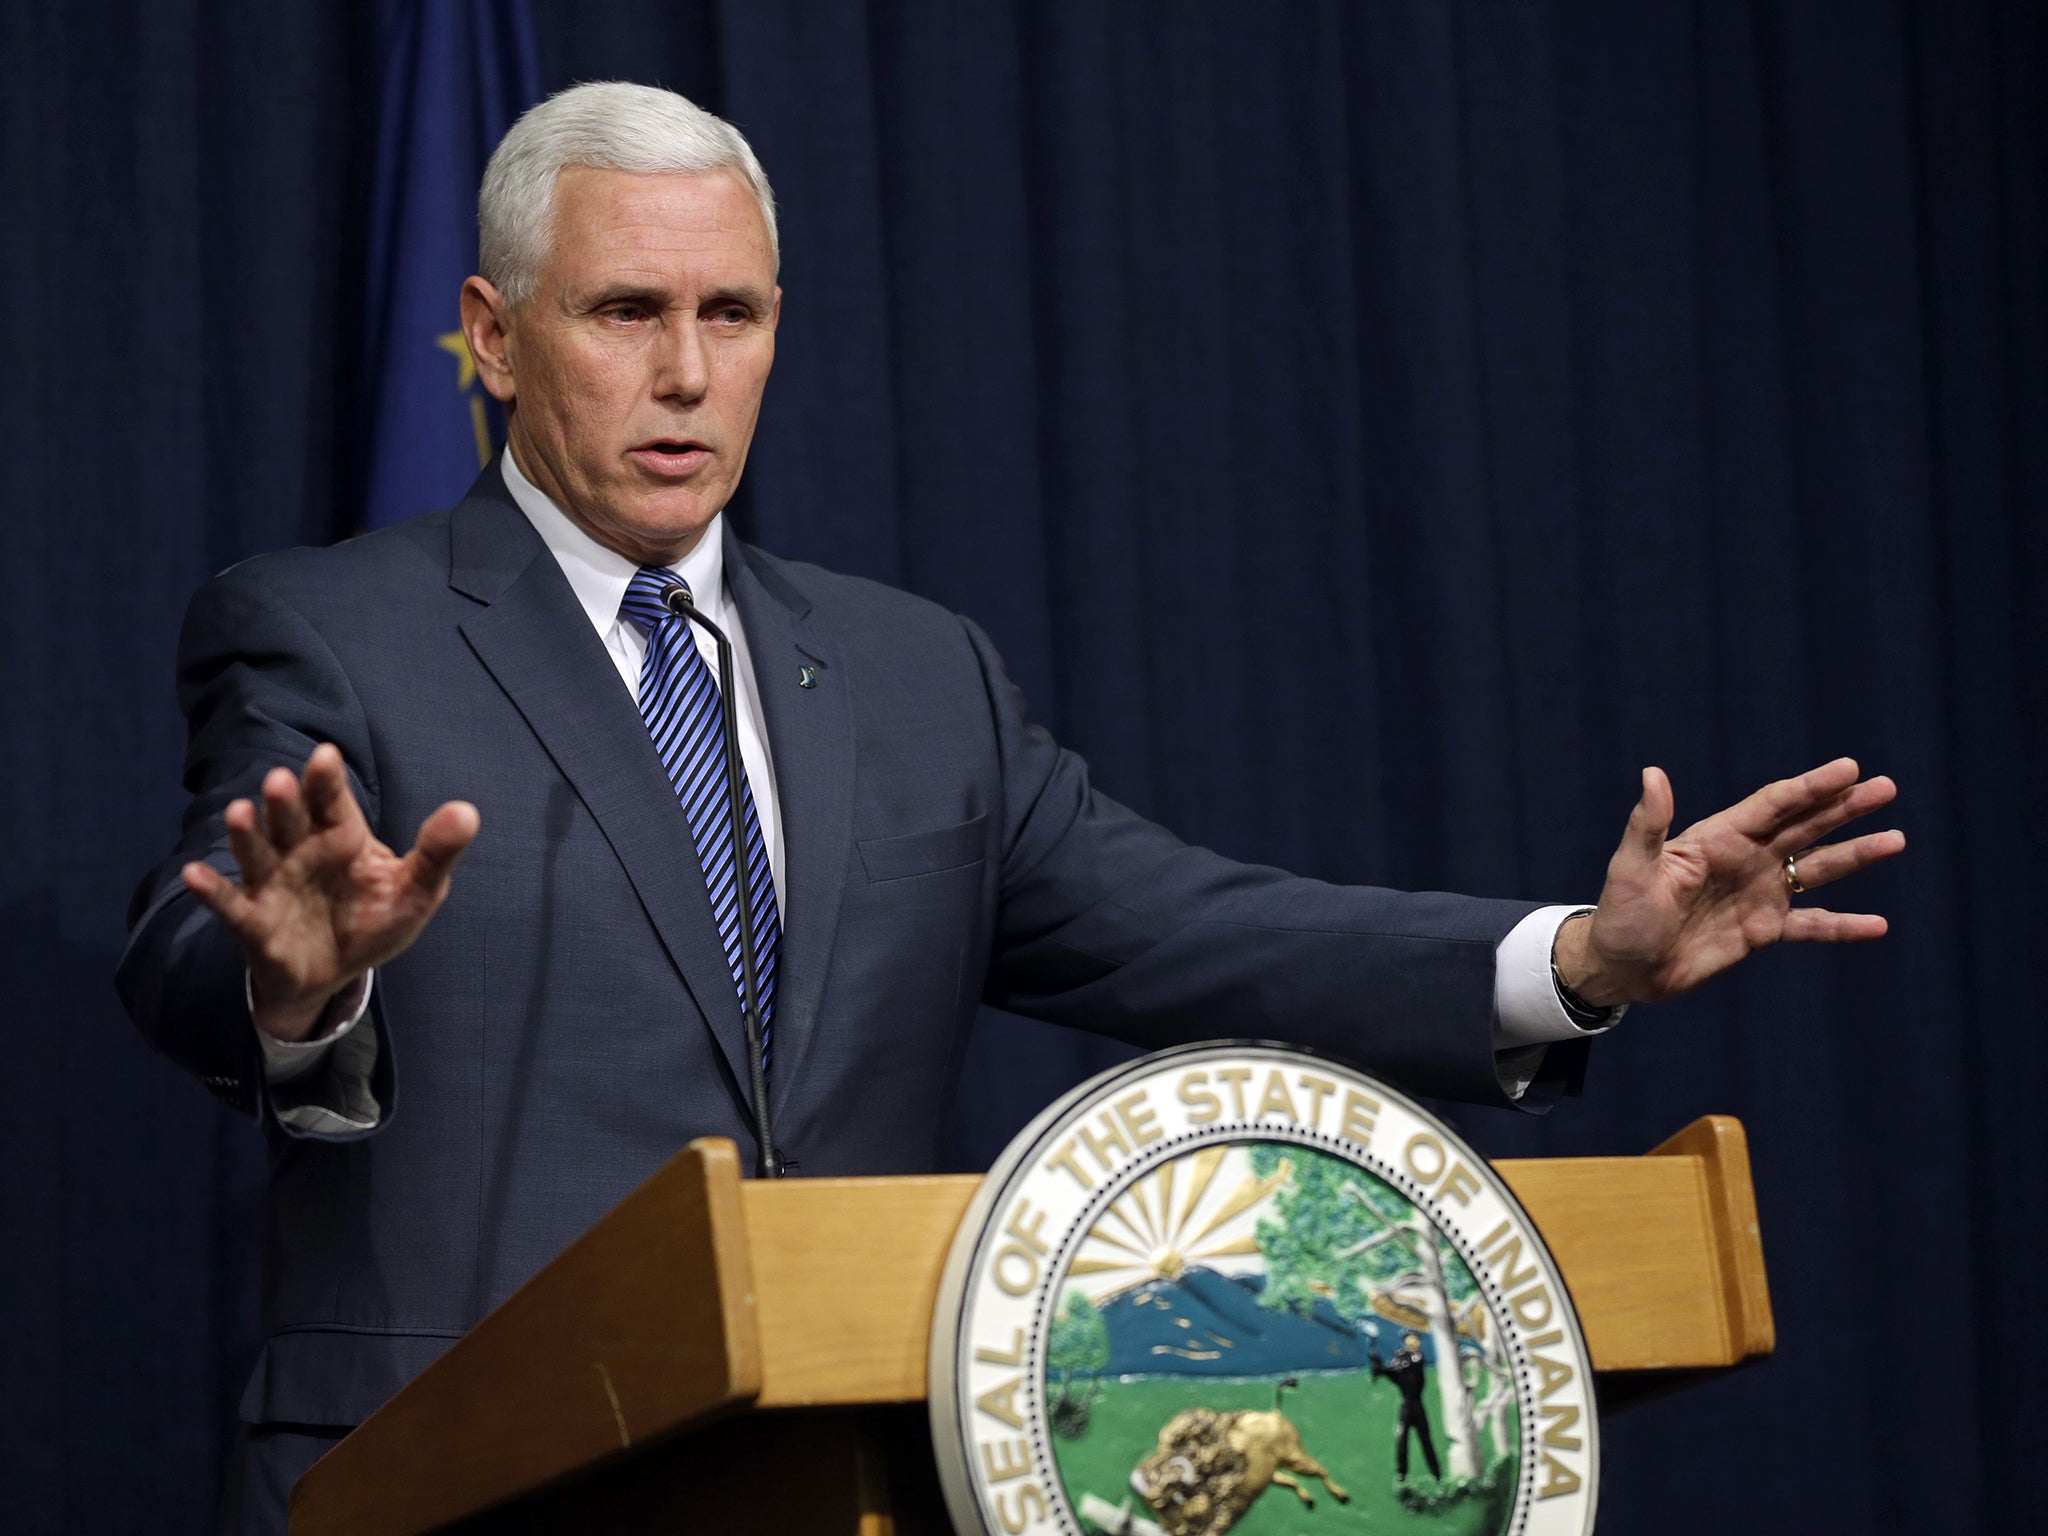 Republican Governor Mike Pence said Ted Cruz was a "principled conservative"